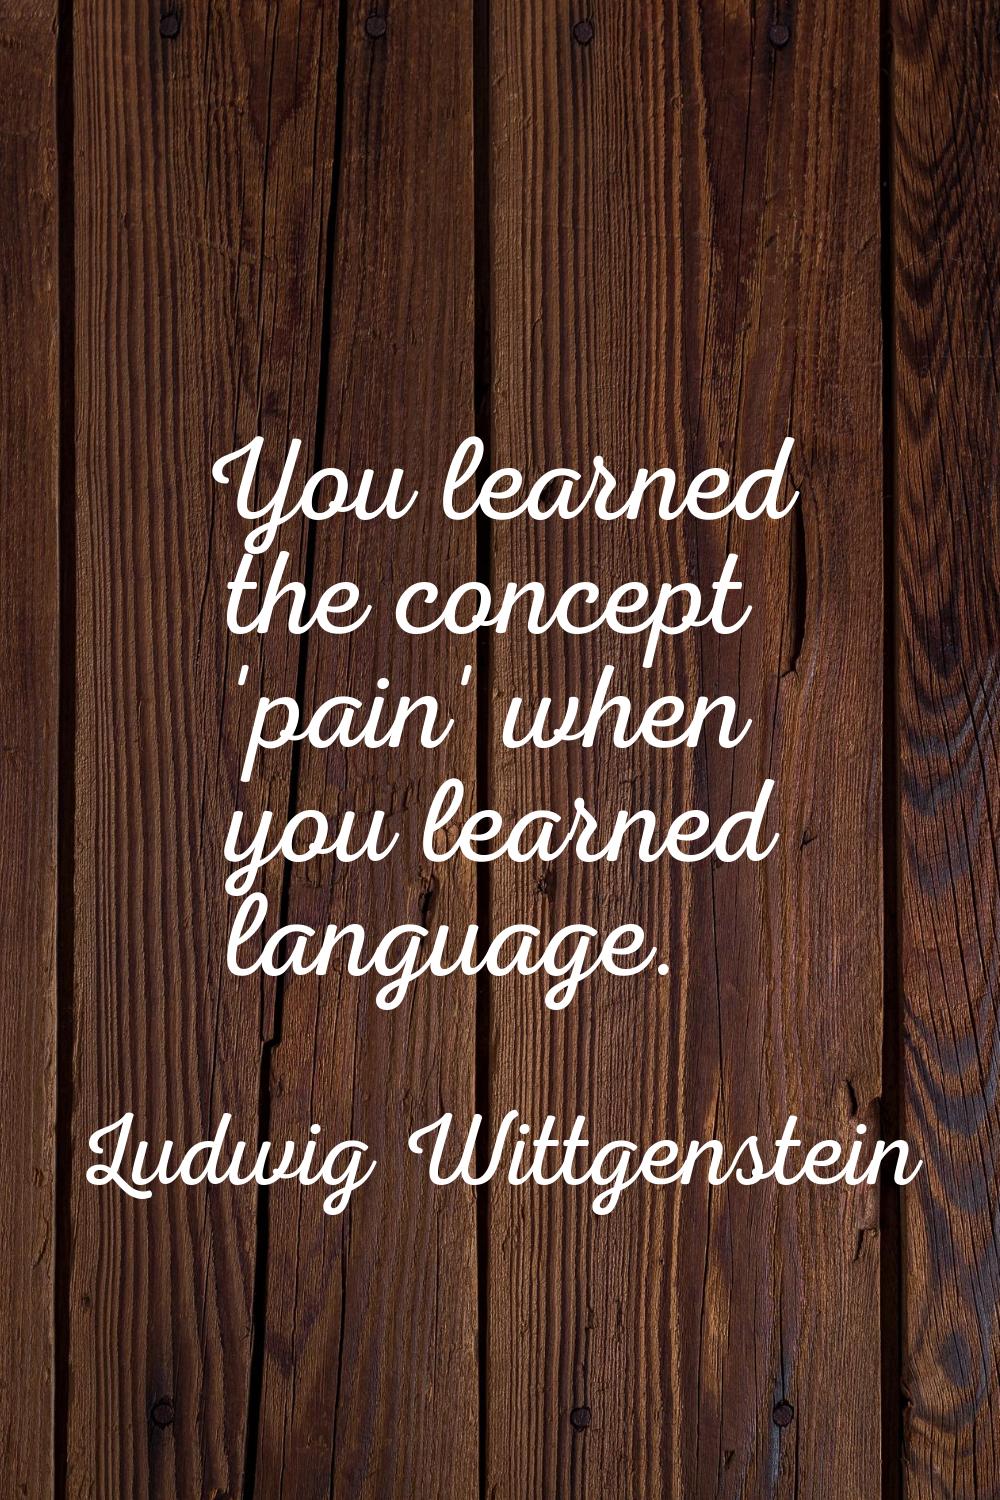 You learned the concept 'pain' when you learned language.